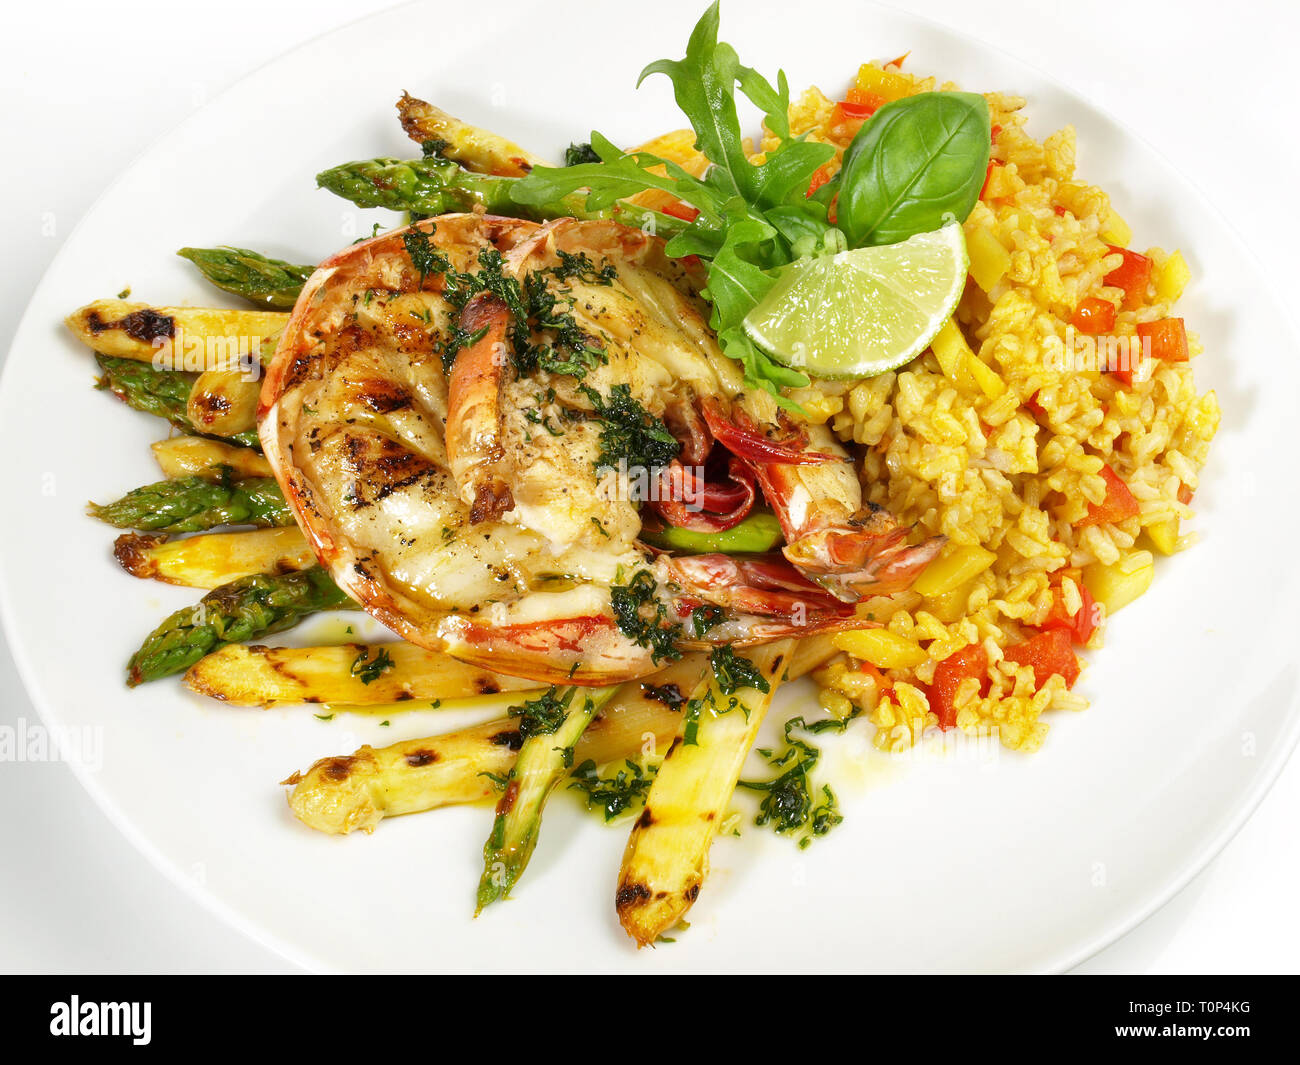 Grilled King Prawn - Tiger Prawn with Rice and Asparagus on white Background Stock Photo